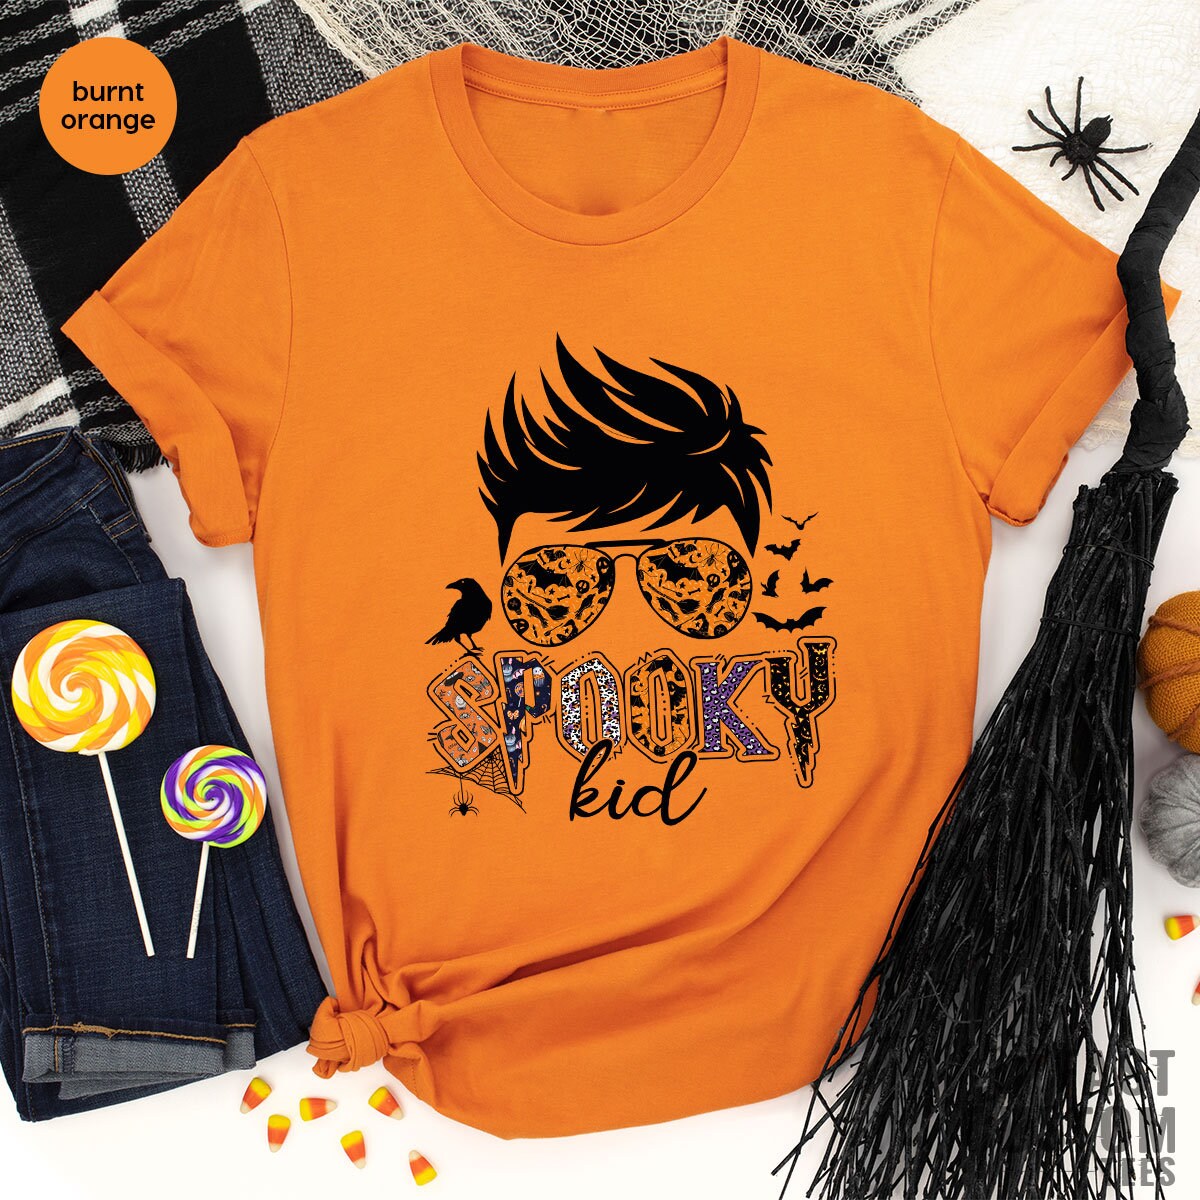 Spooky Kid Shirt, Funny Halloween Toddler, Halloween Shirts For Boys, Boys Halloween T-Shirt, Halloween Family Matching T Shirt - Fastdeliverytees.com